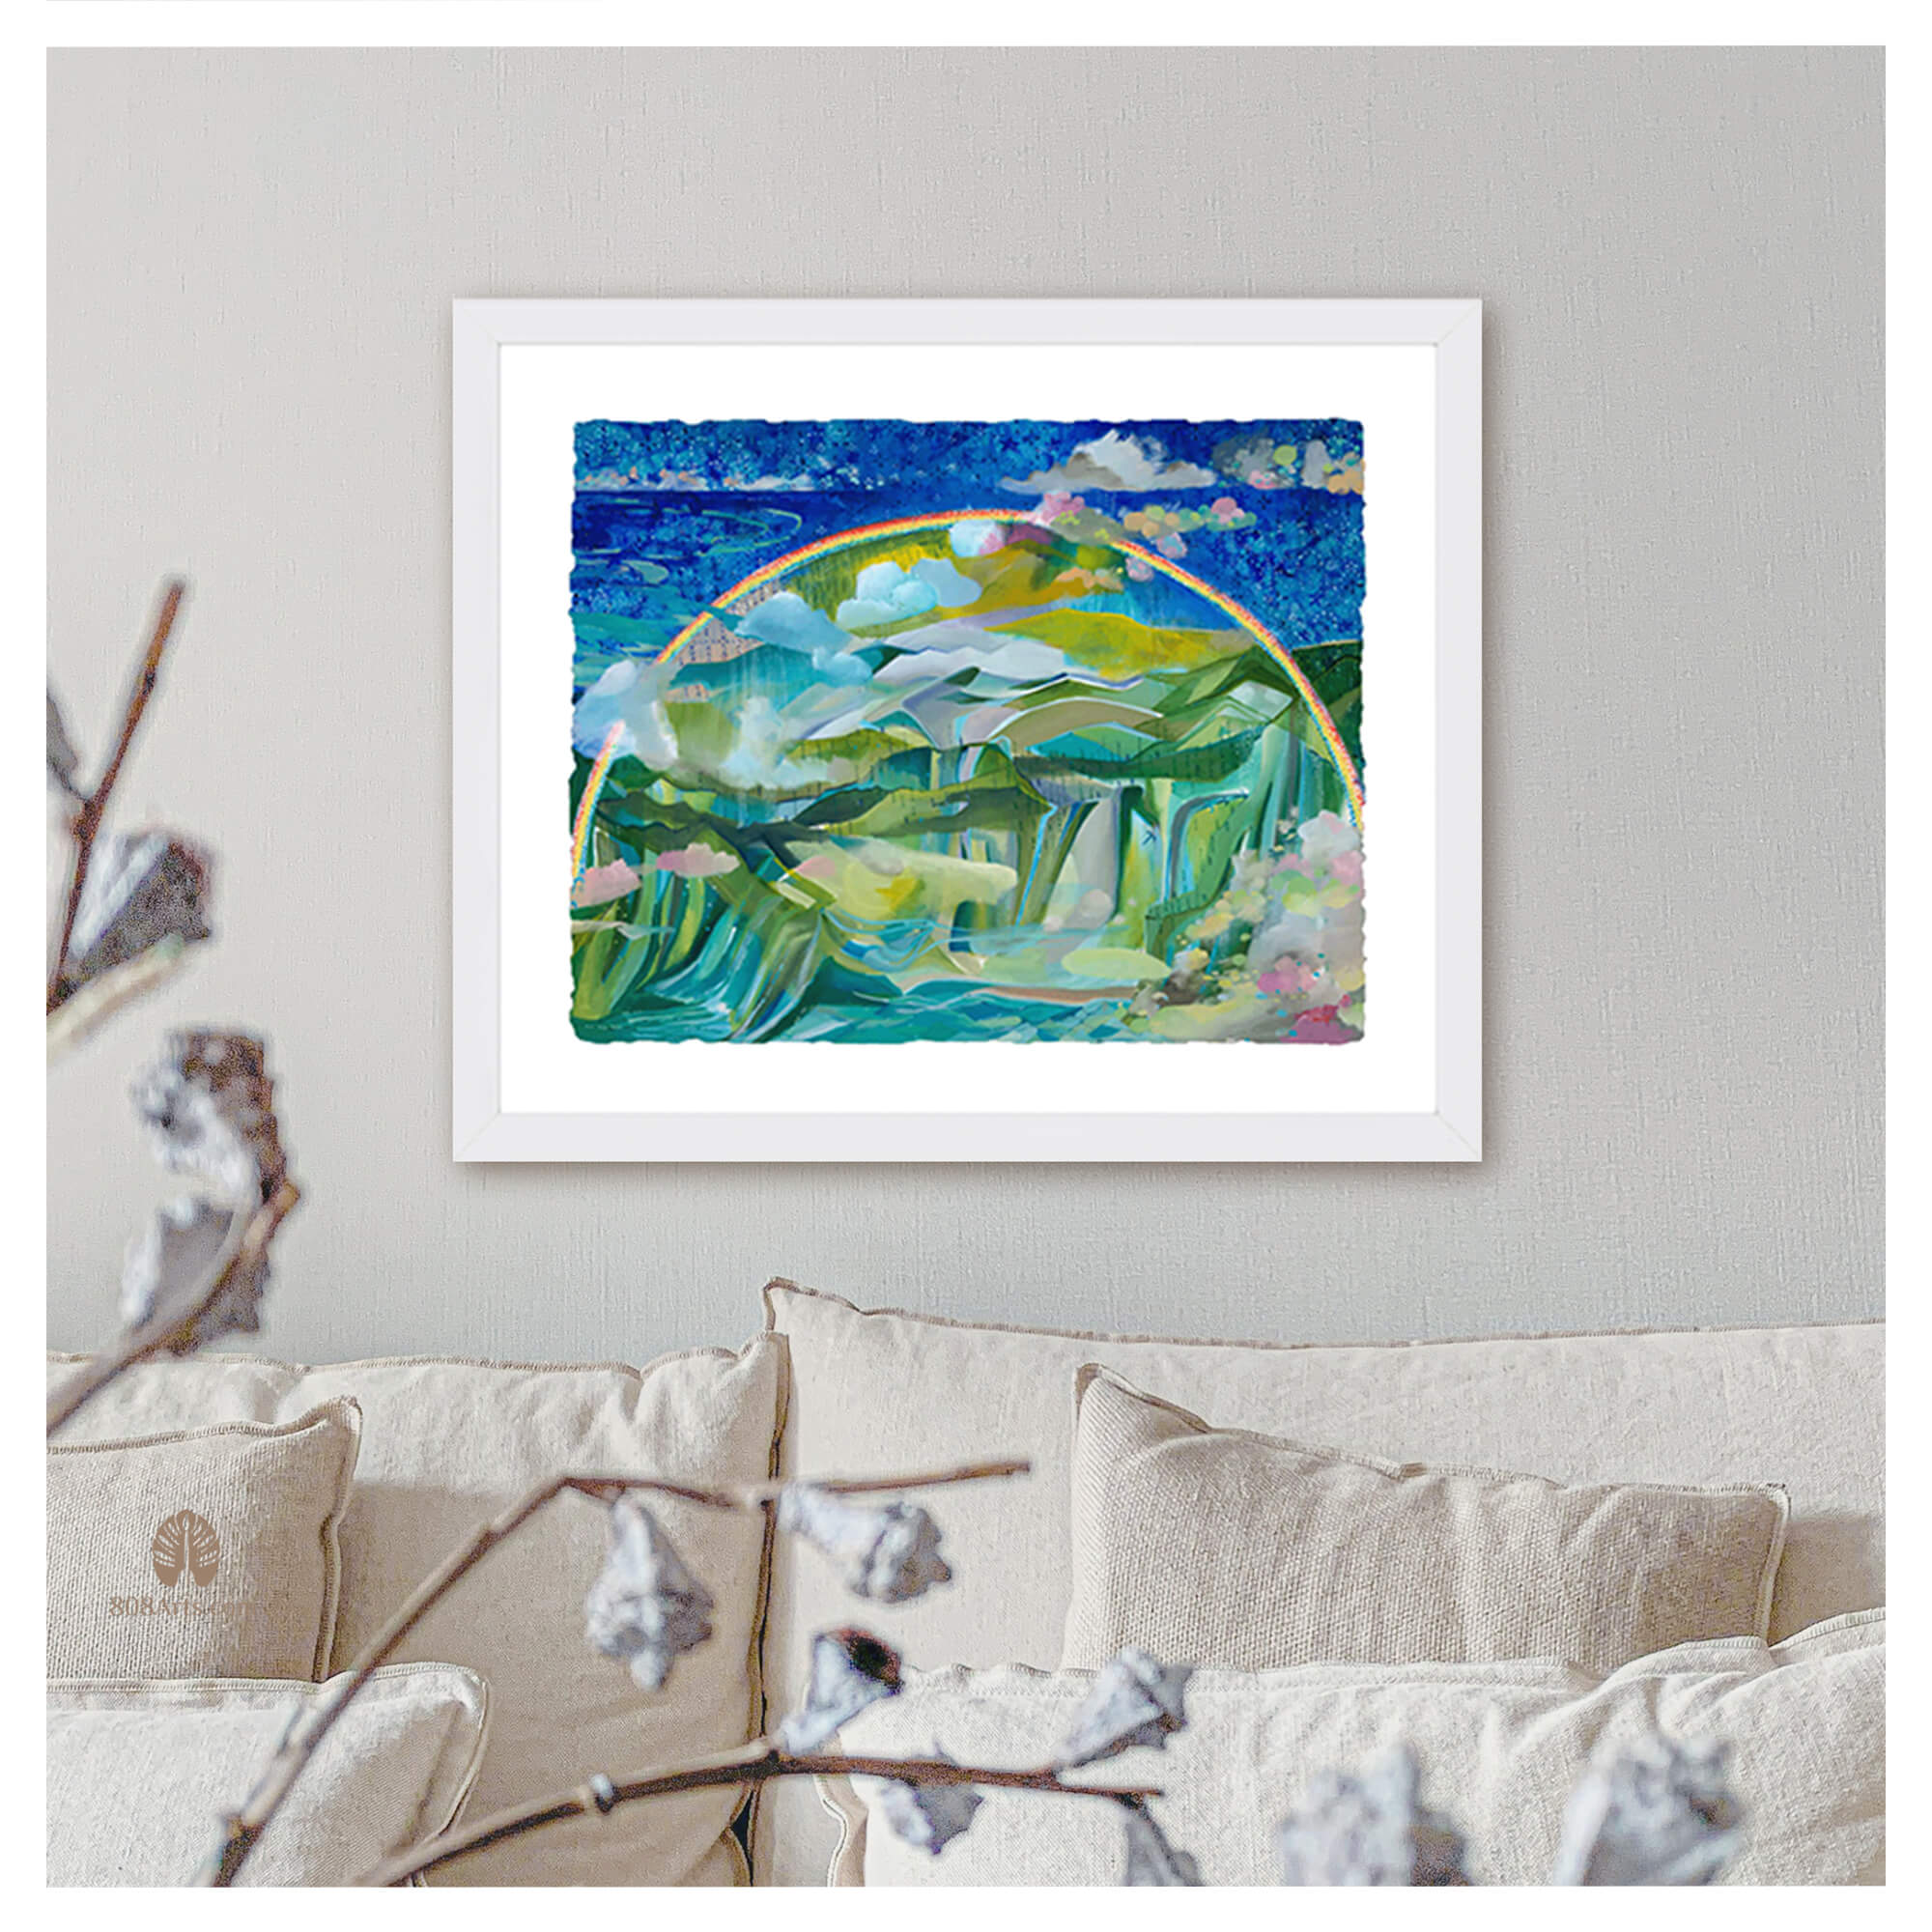 Framed paper art print of an abstract landscape with a rainbow over the mountains by Hawaii artist Saumolia Puapuaga